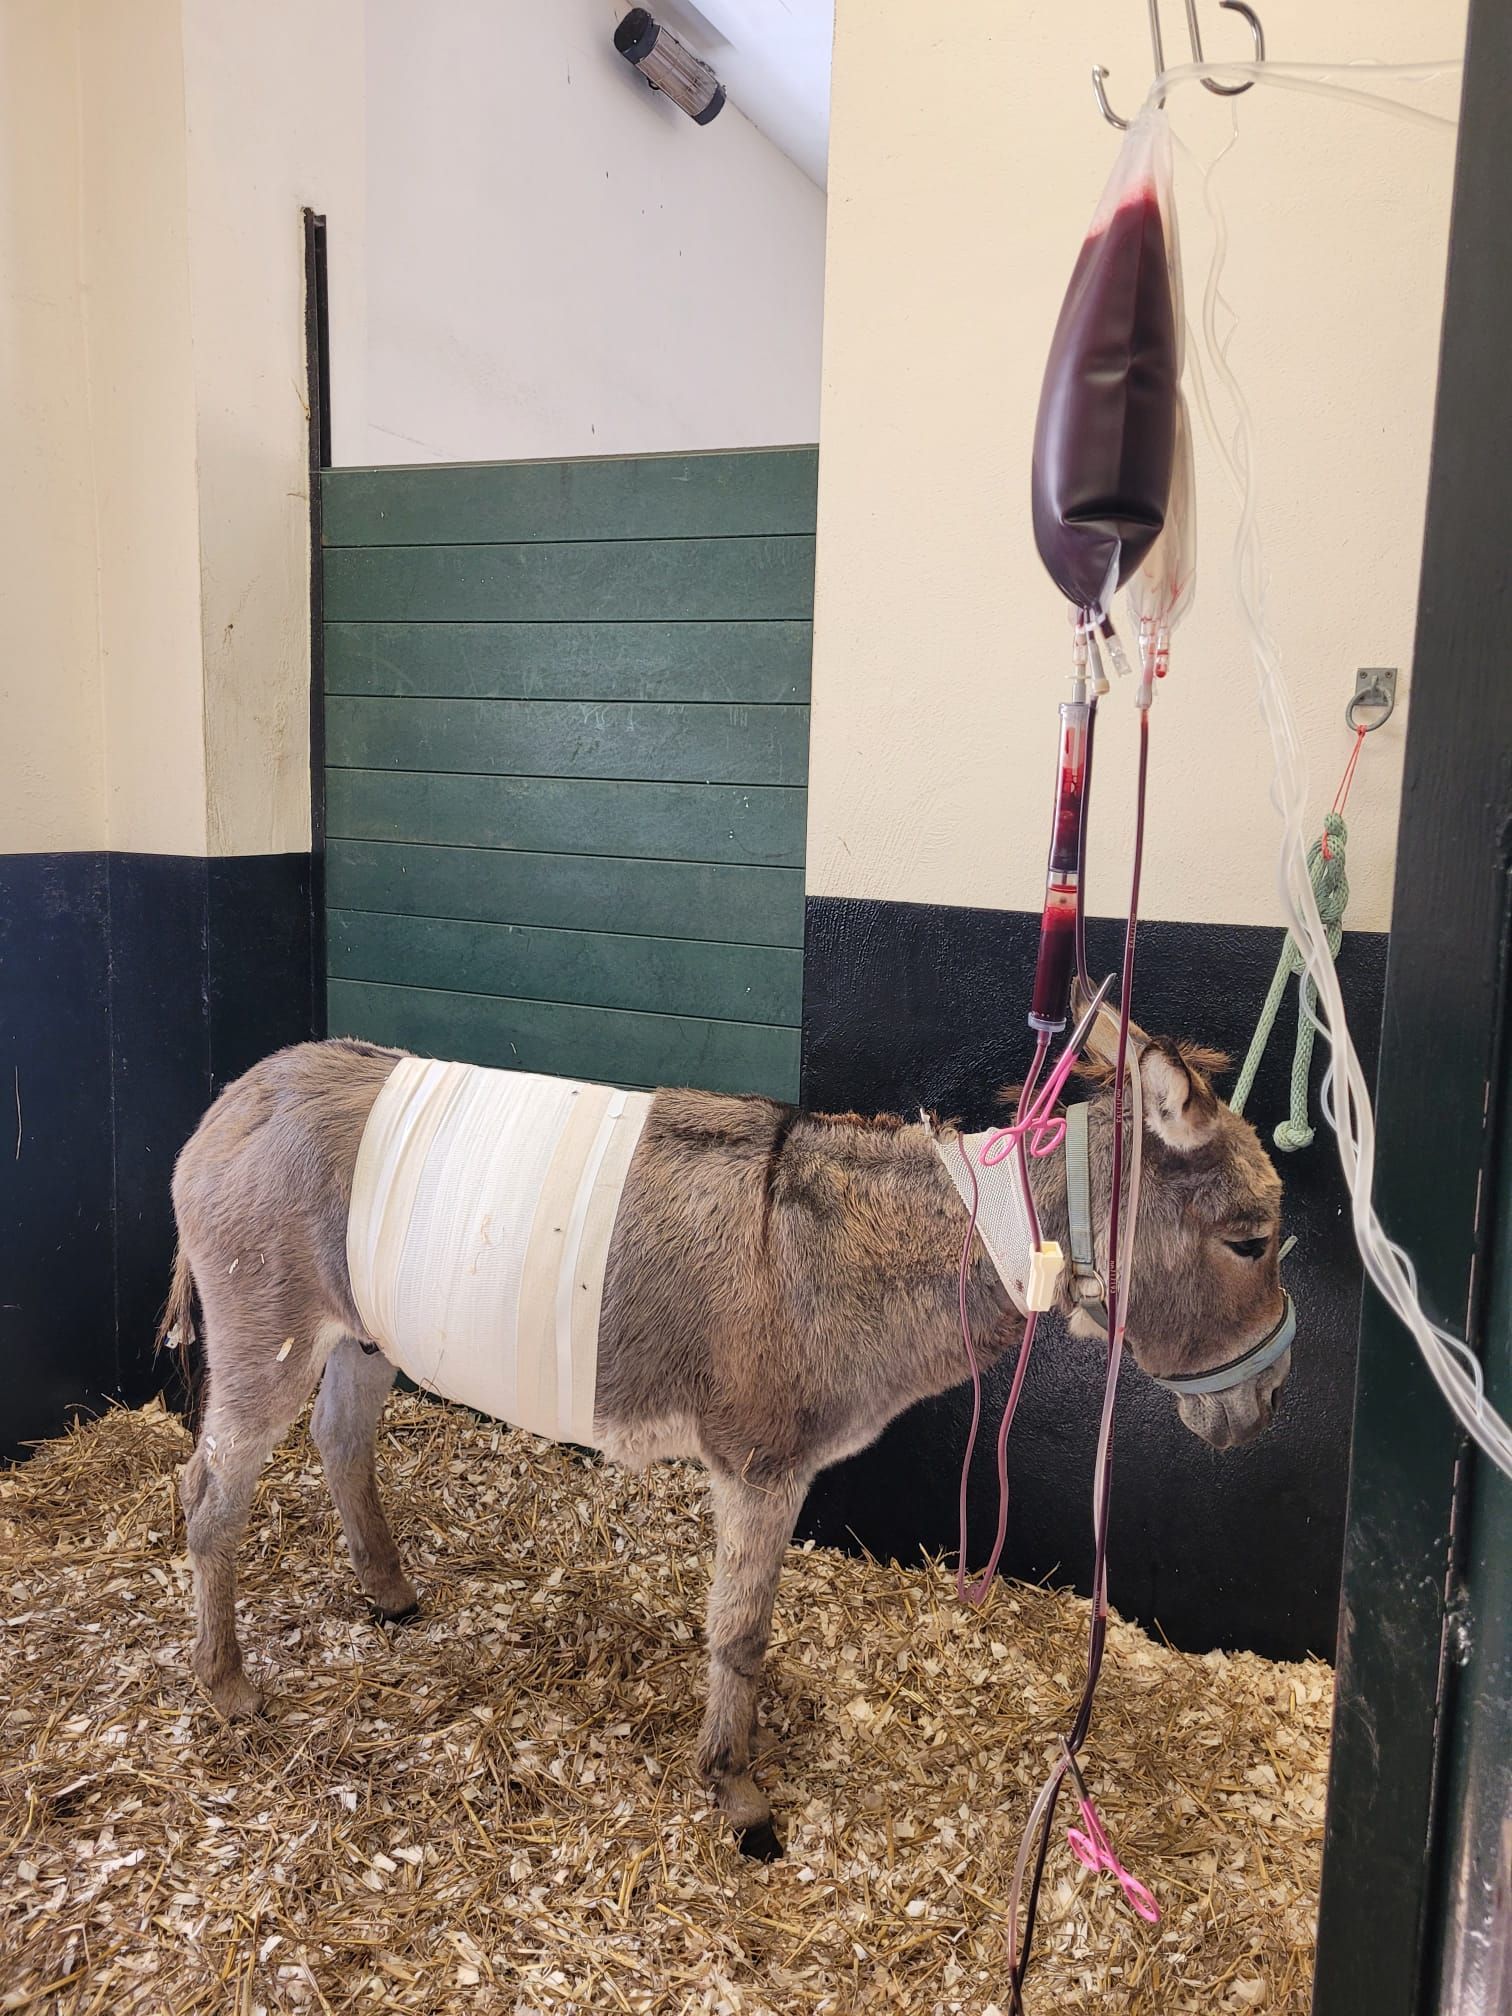 donkey with bandages and a drip